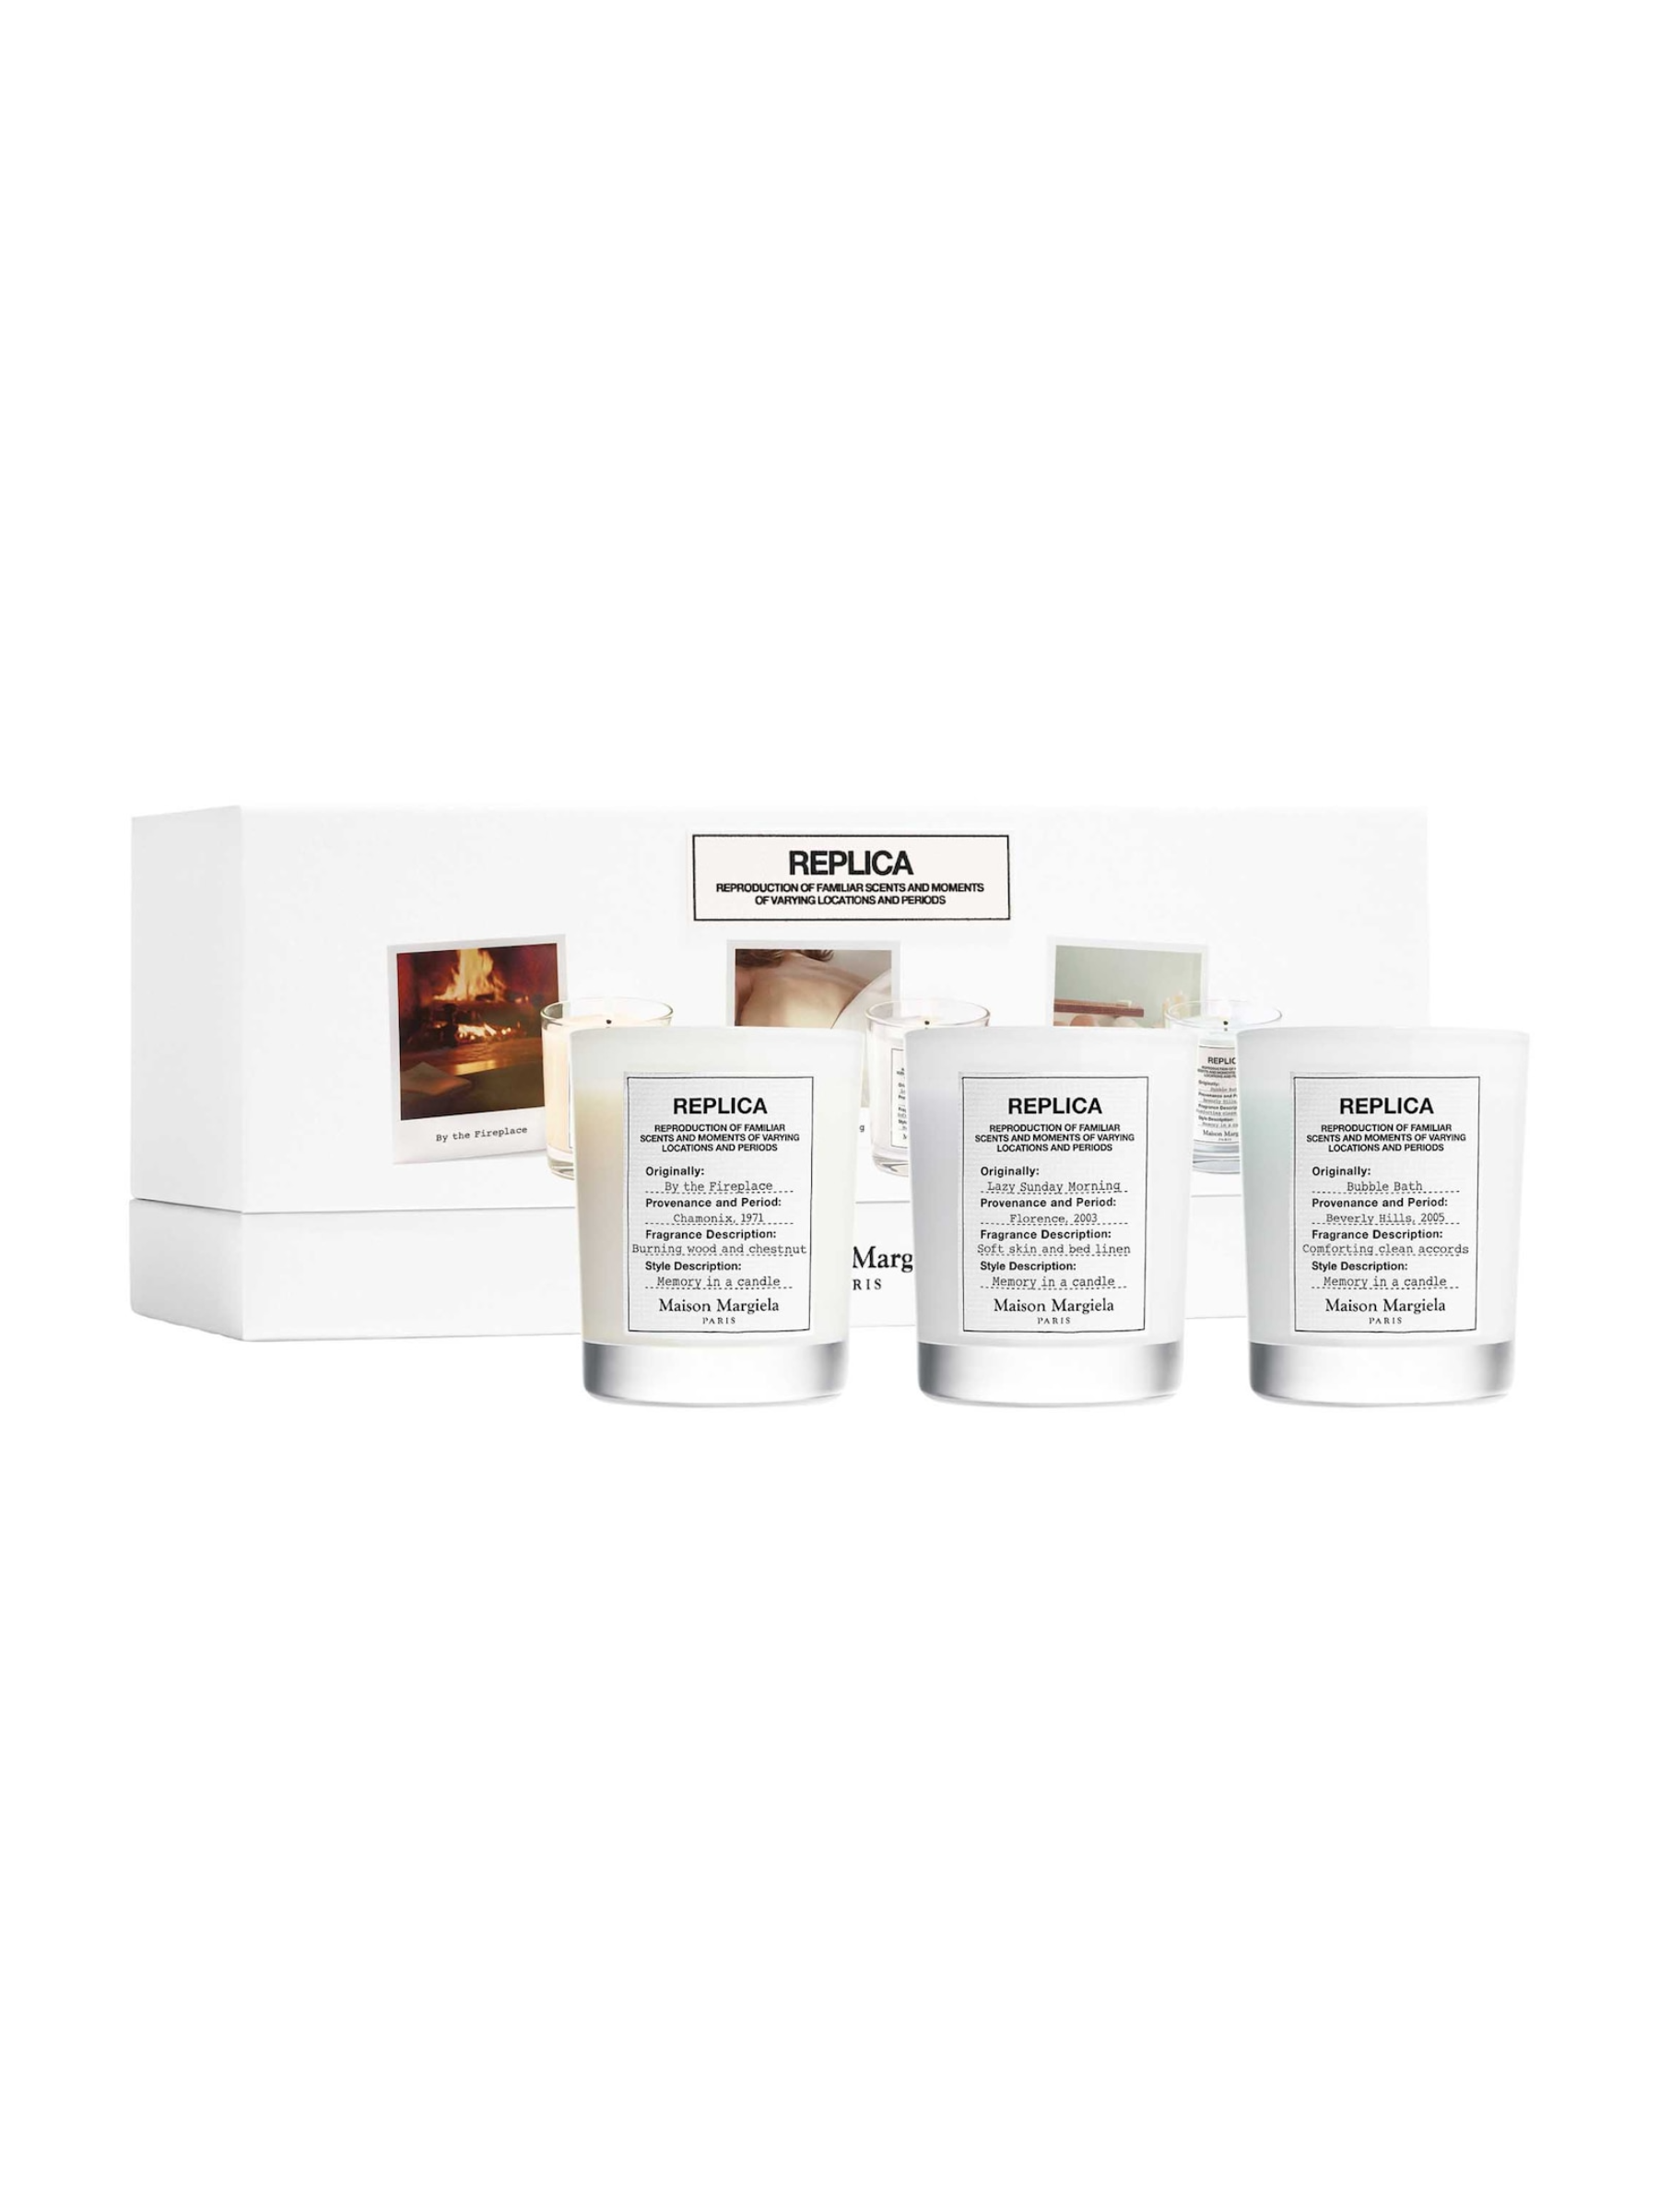 This candle trio features three relaxing scents: Lazy Sunday Morning, By the Fireplace, and Bubble Bath, to put them right into chill mode after a busy school week or finals. $85, Nordstrom. <a href="https://www.nordstrom.com/s/maison-margiela-scented-candle-set-limited-edition-usd-126-value/7355250?">Get it now!</a><p>Sign up for today’s biggest stories, from pop culture to politics.</p><a href="https://www.glamour.com/newsletter/news?sourceCode=msnsend">Sign Up</a>